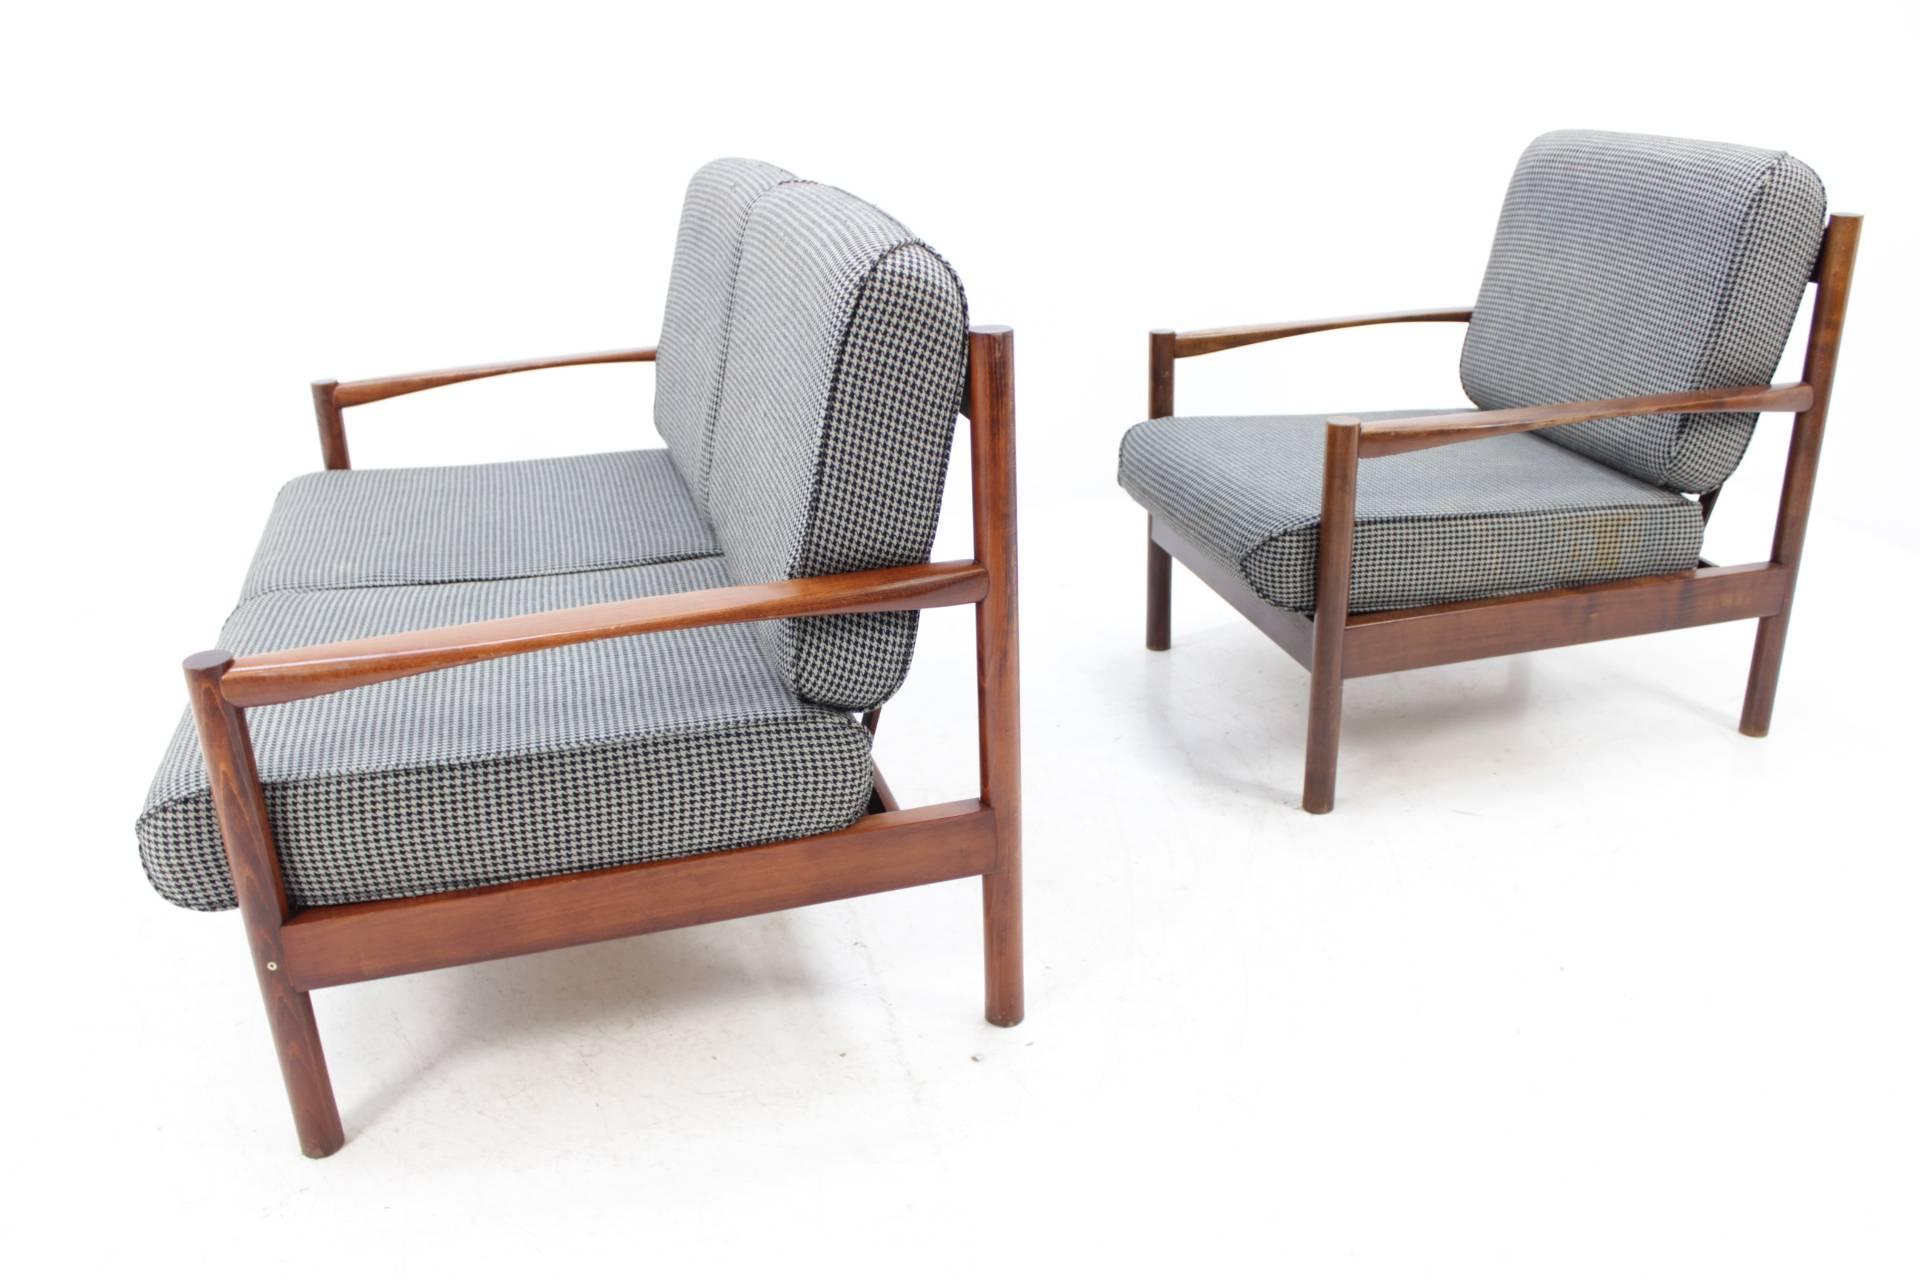 Late 20th Century Scandinavian Design Seating Set For Sale